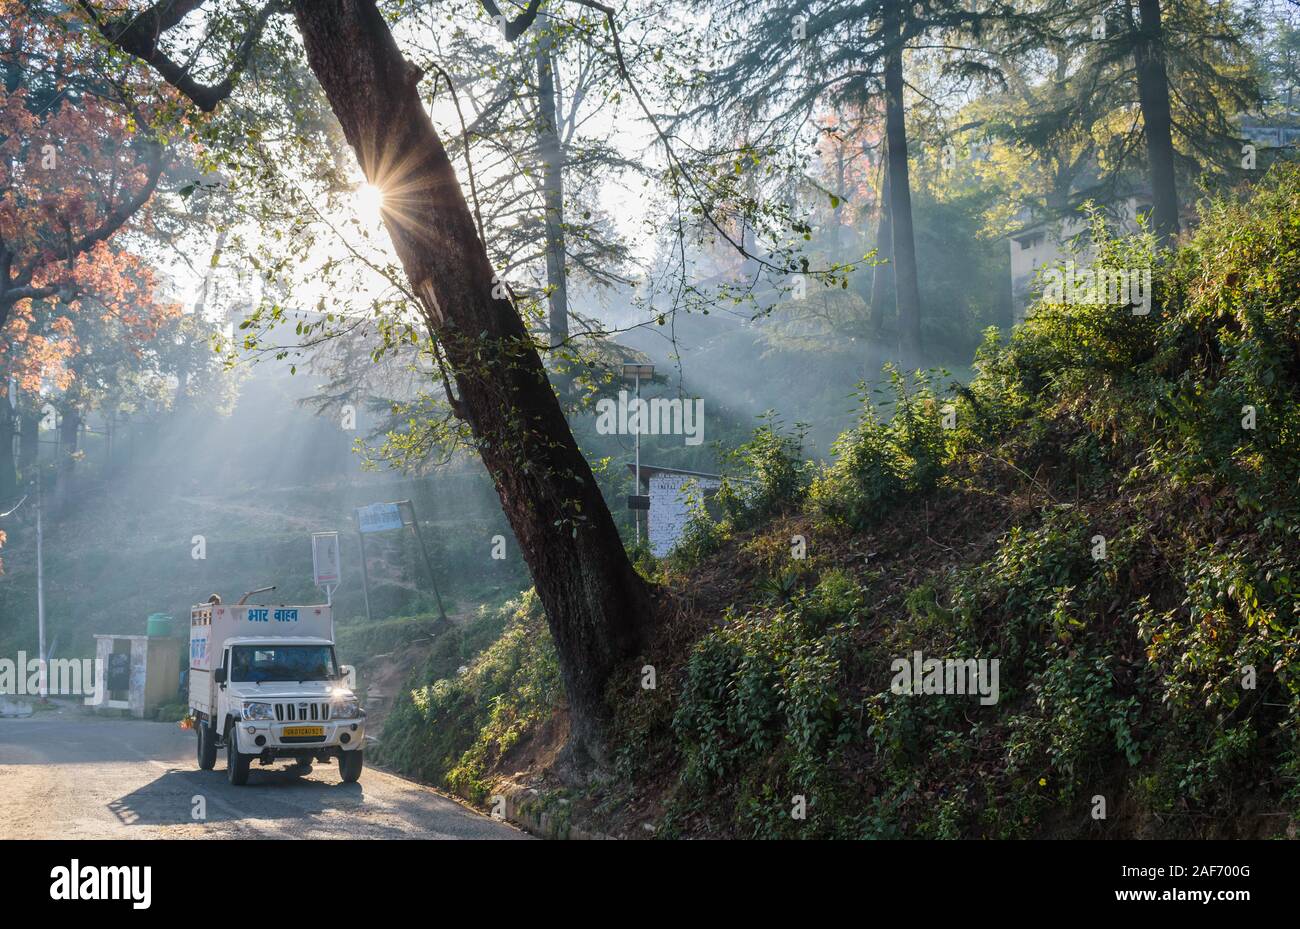 Light shafts scatter around a tree and foliage on a misty morning as a tempo wagon drives through a road that winds through the landscape in Almora. Stock Photo